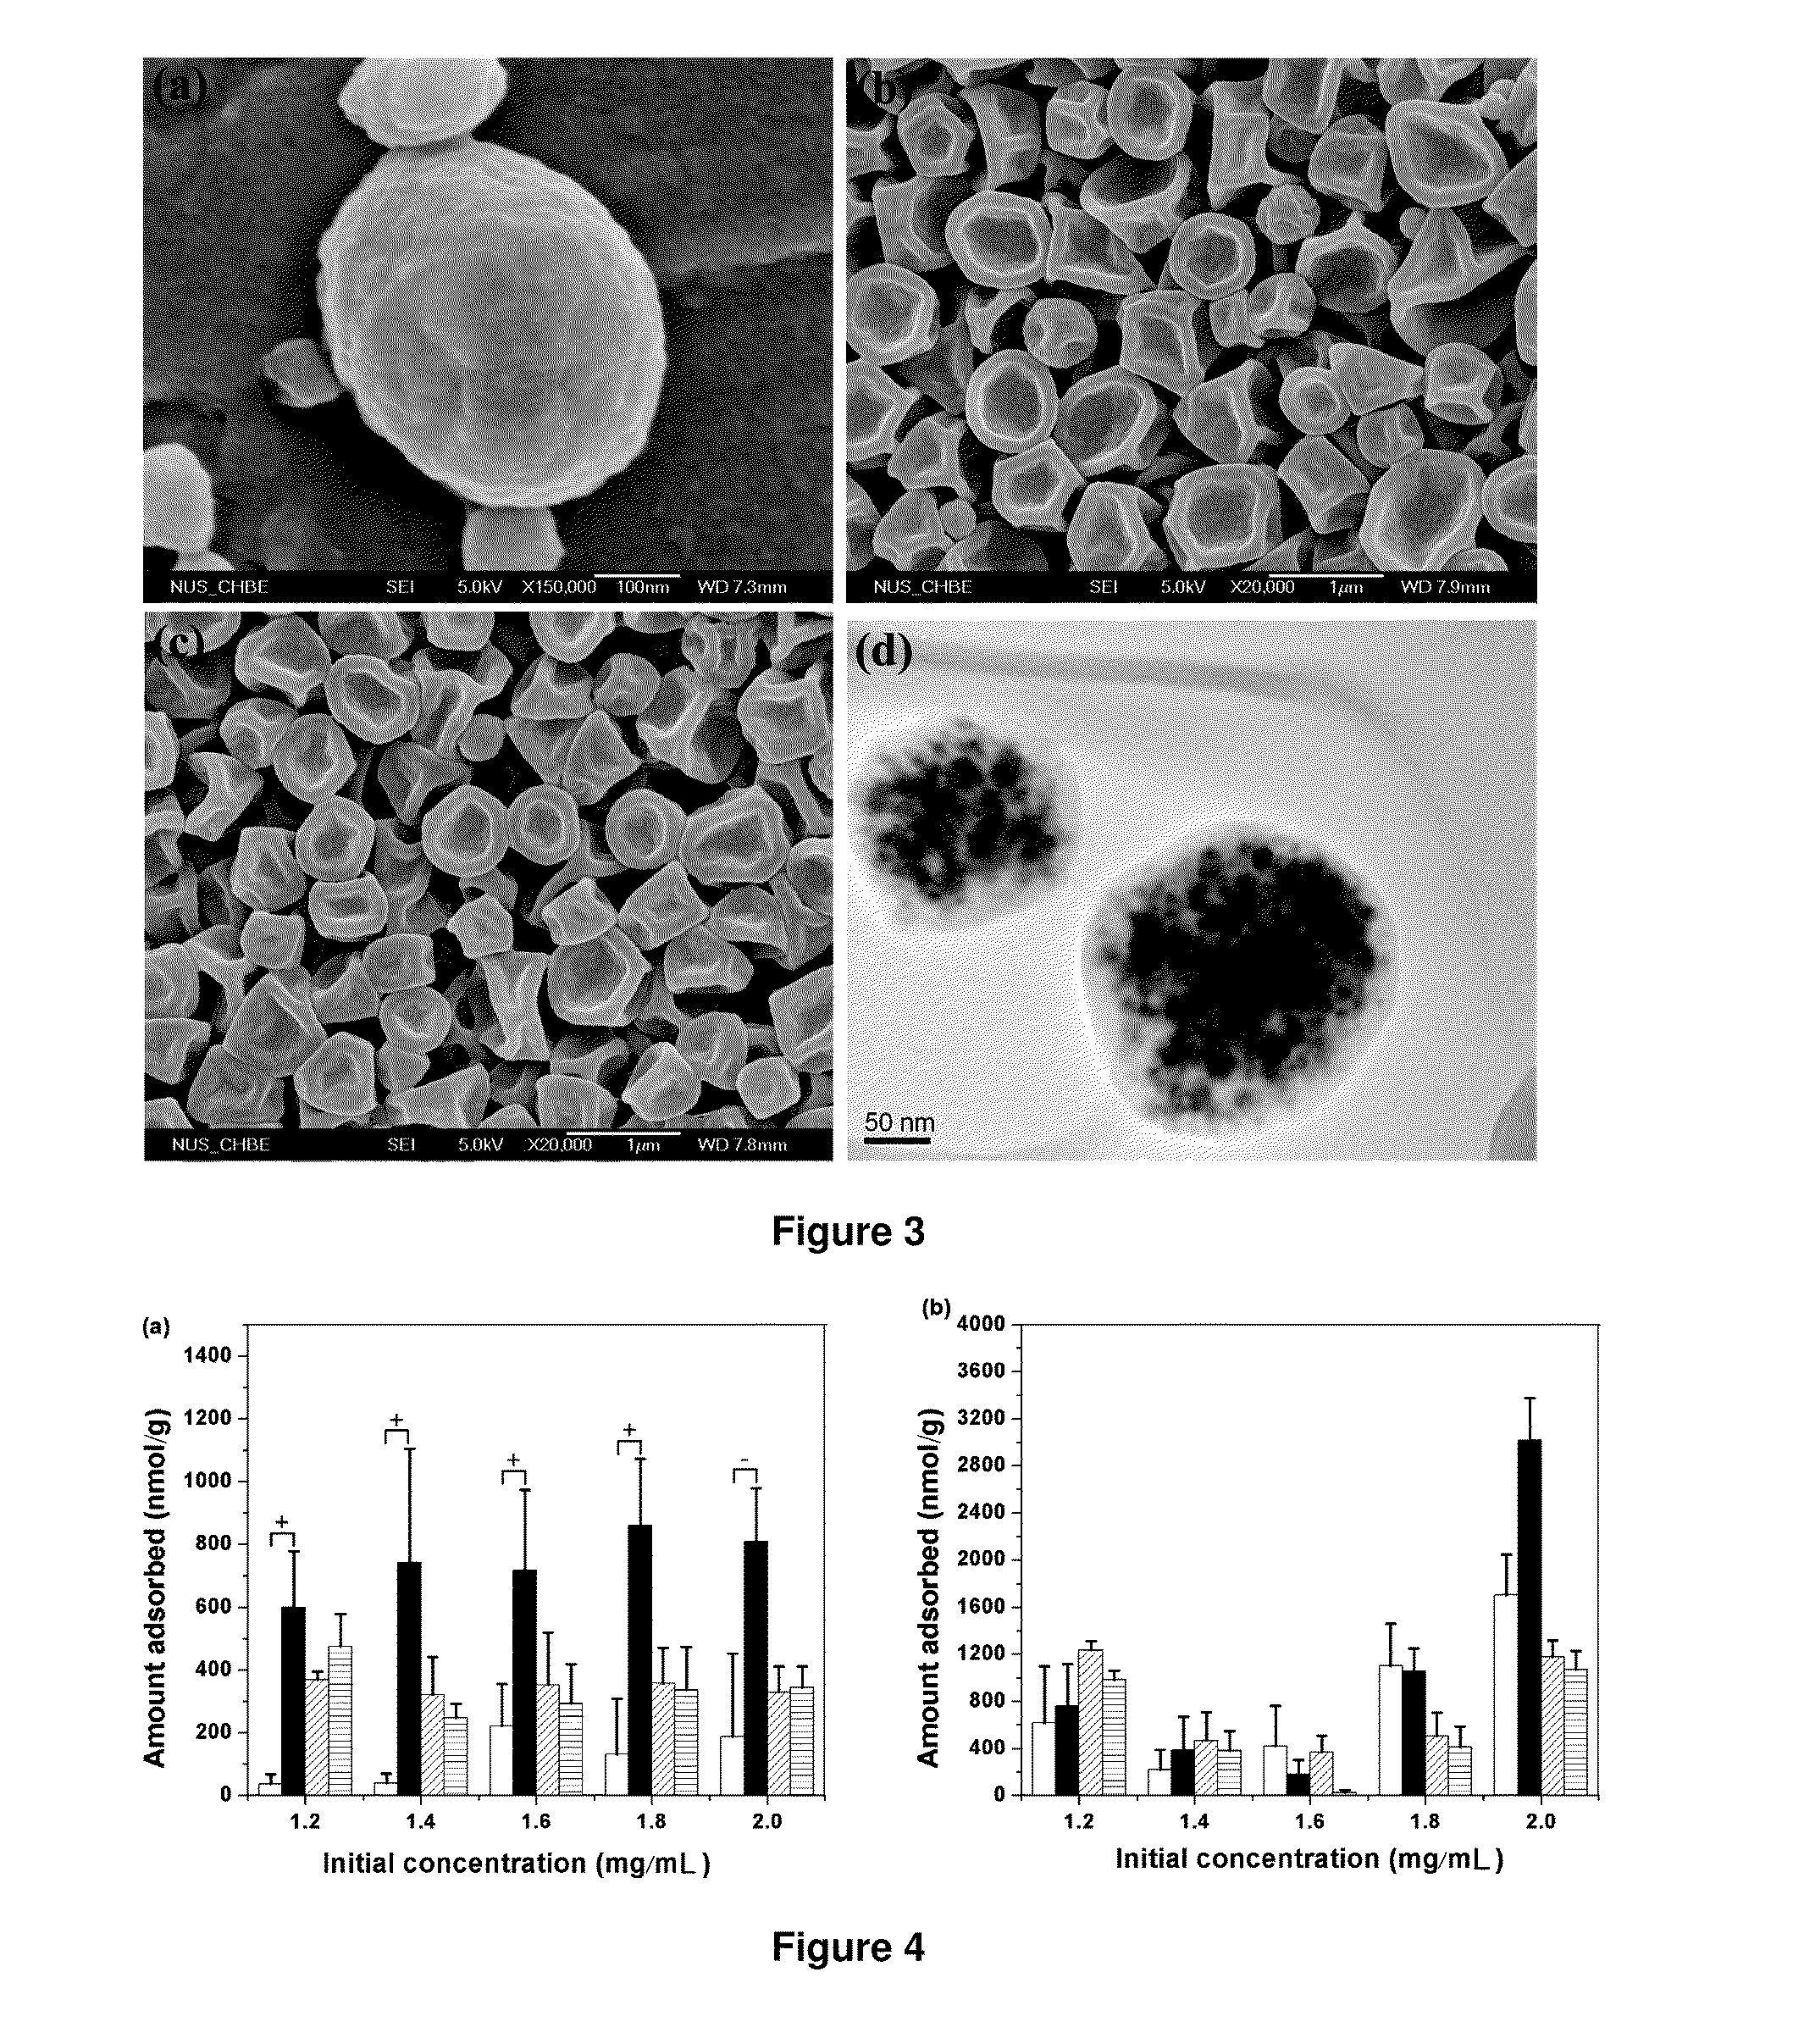 Nanostructures, methods of preparing and uses thereof